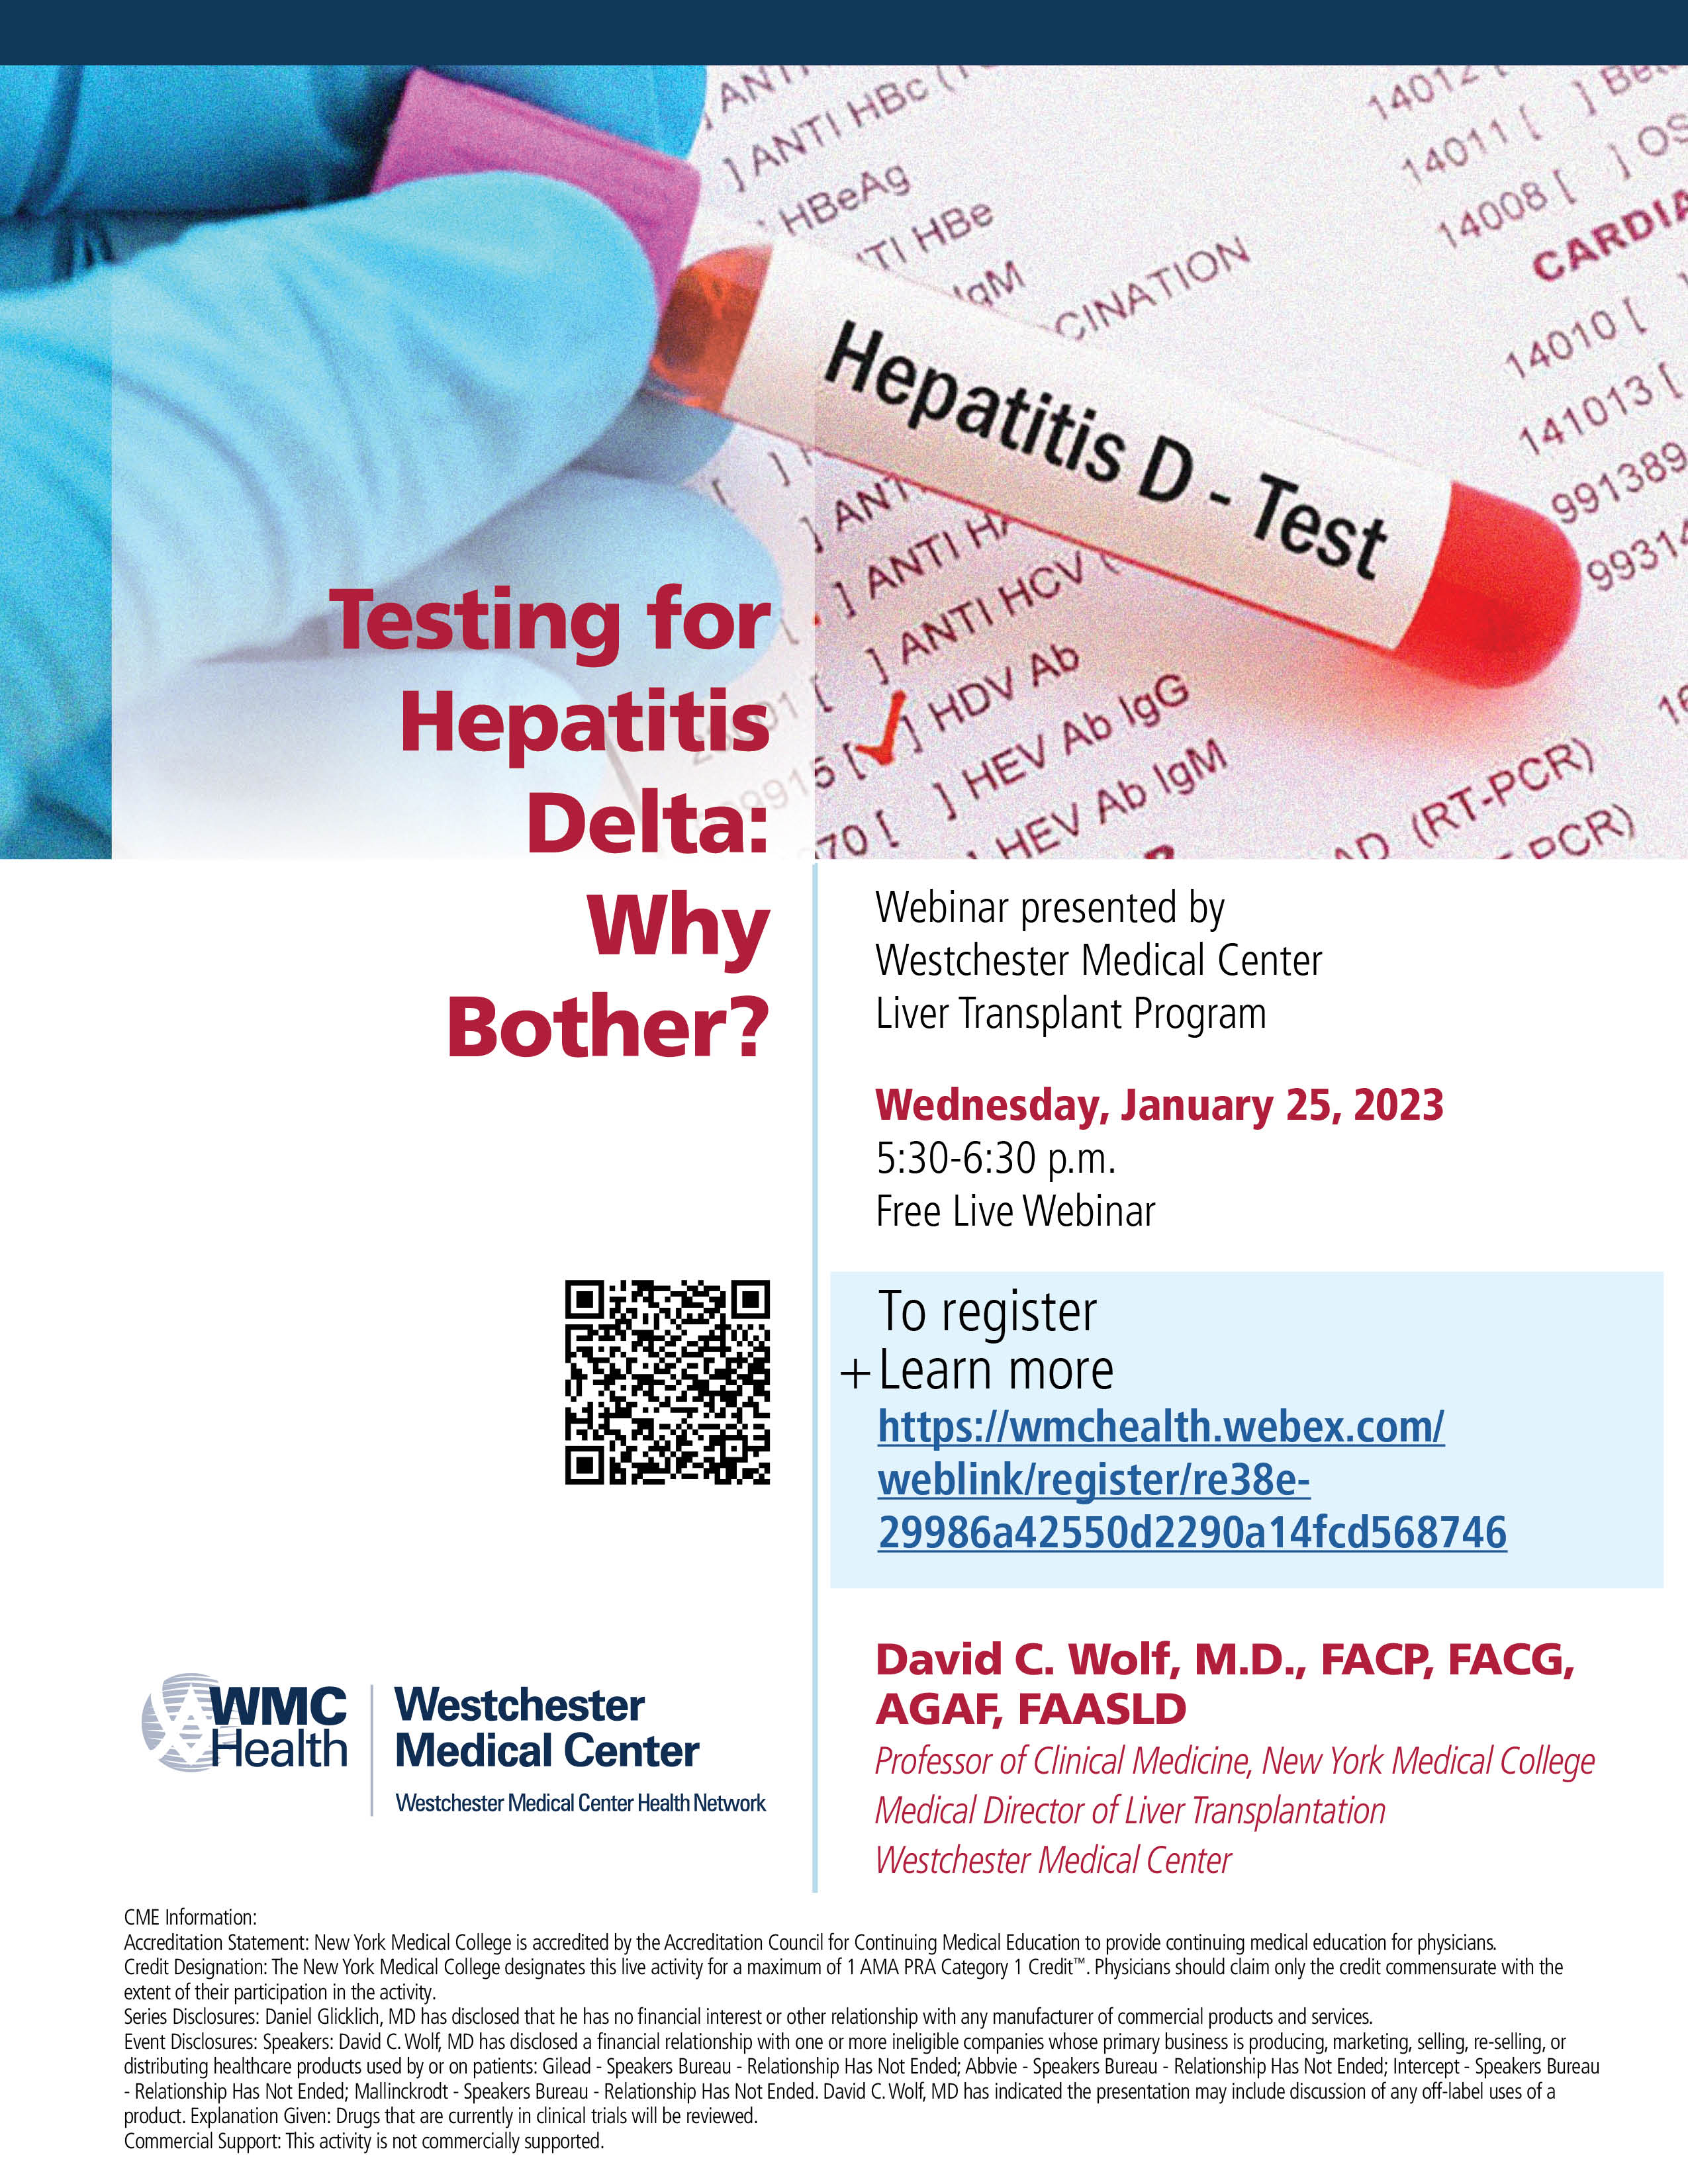 Testing for Hepatitis Delta: Why Bother?